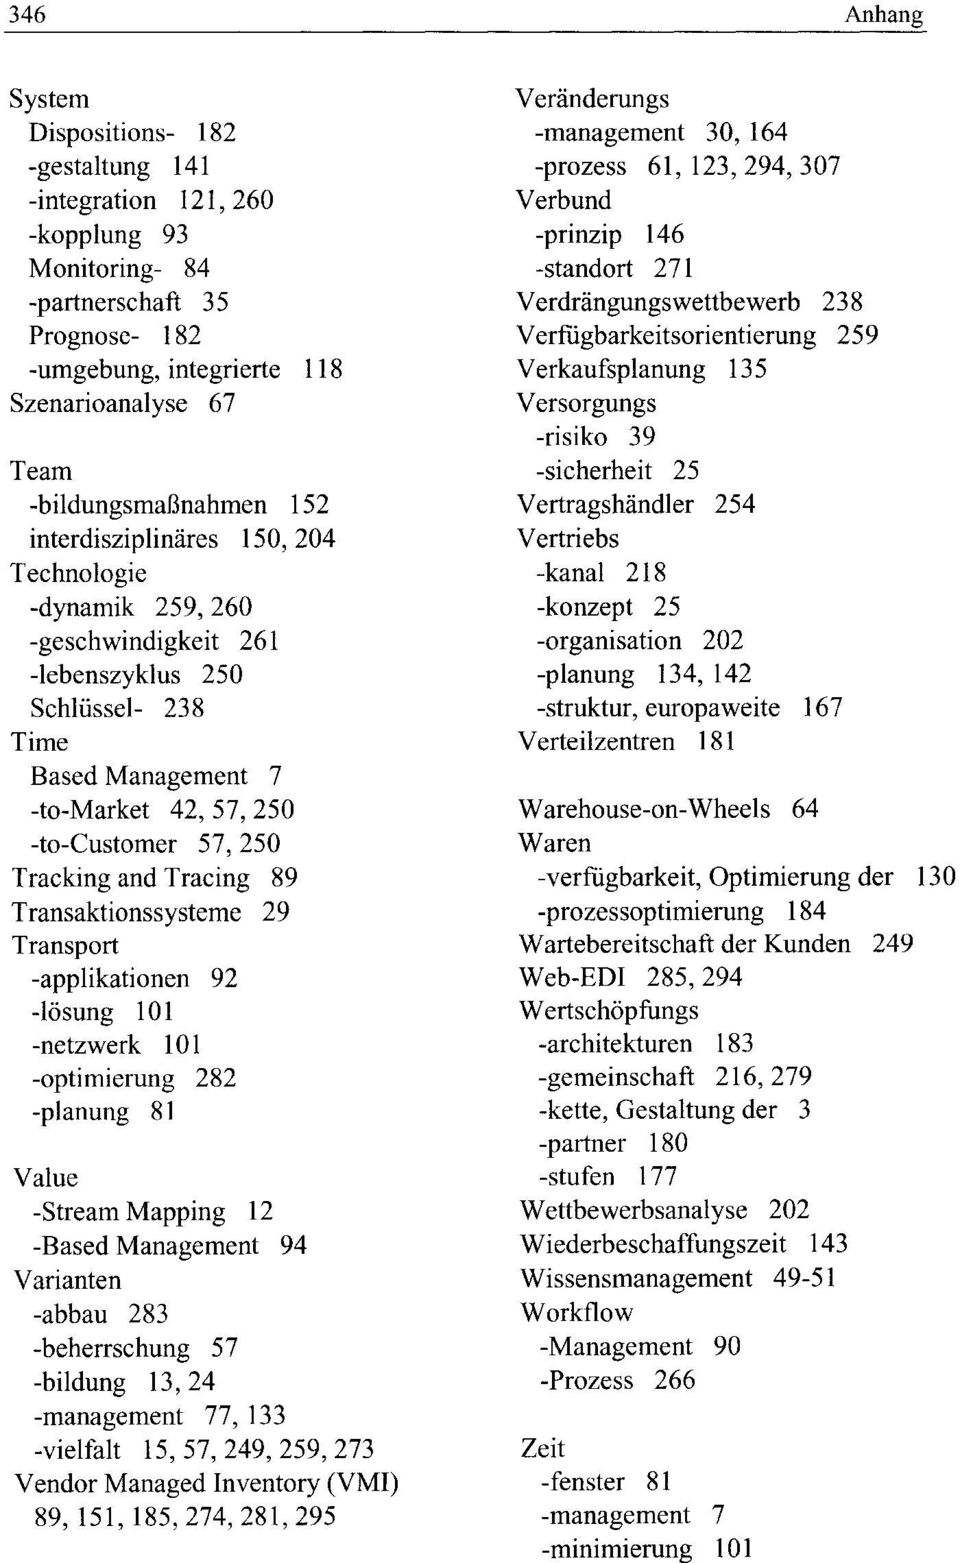 57,250 Tracking and Tracing 89 Transaktionssysteme 29 Transport -applikationen 92 -losung 101 -netzwerk 101 -optimierung 282 -planung 81 Value -Stream Mapping 12 -Based Management 94 Varianten -abbau